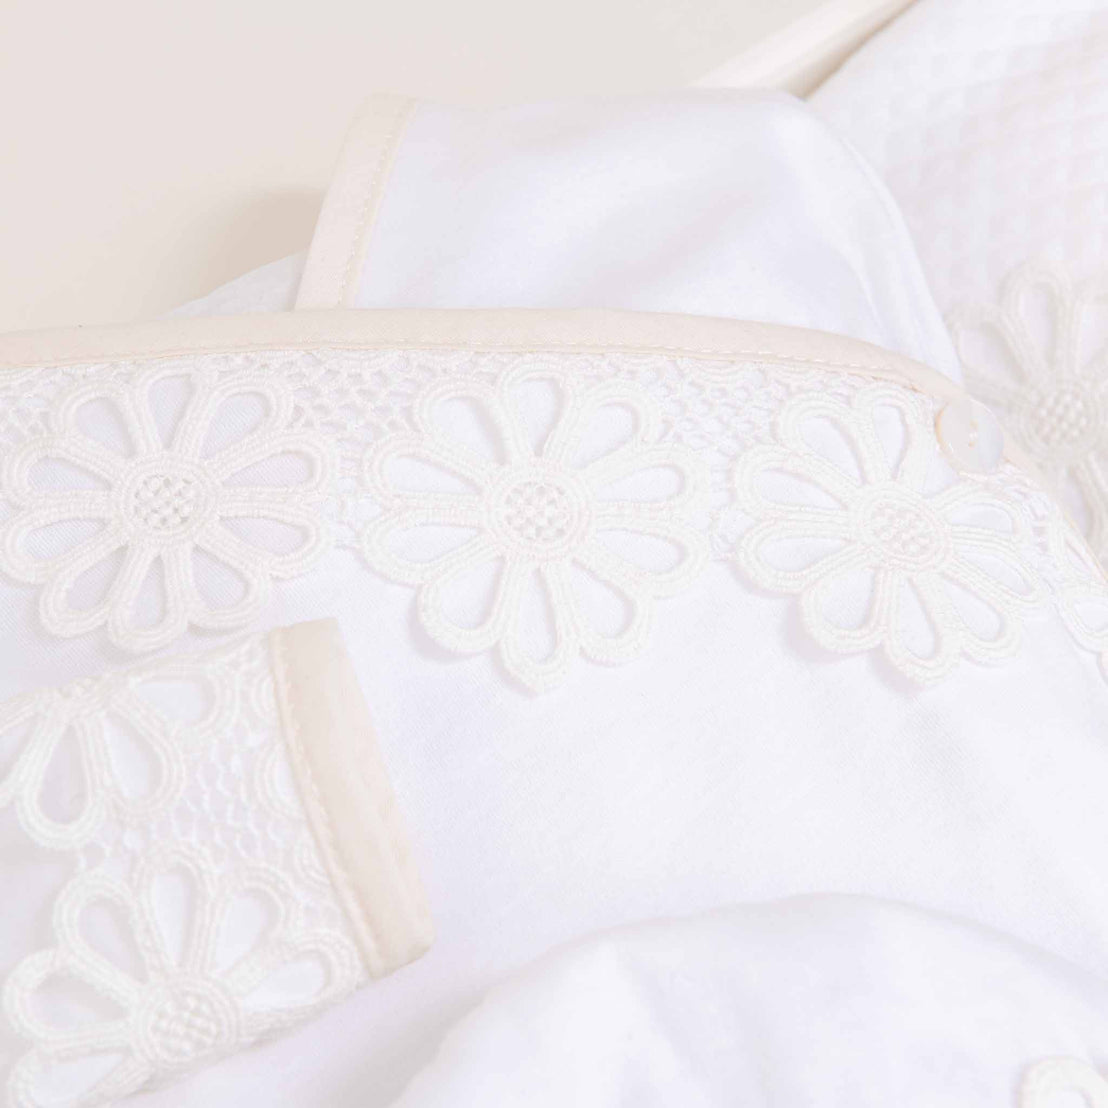 Close-up of a white pillow with intricate lace detailing featuring a floral pattern, placed on a white bedspread. Soft, gentle lighting enhances the elegant texture and design of this Hannah Knot Gown & Bonnet.